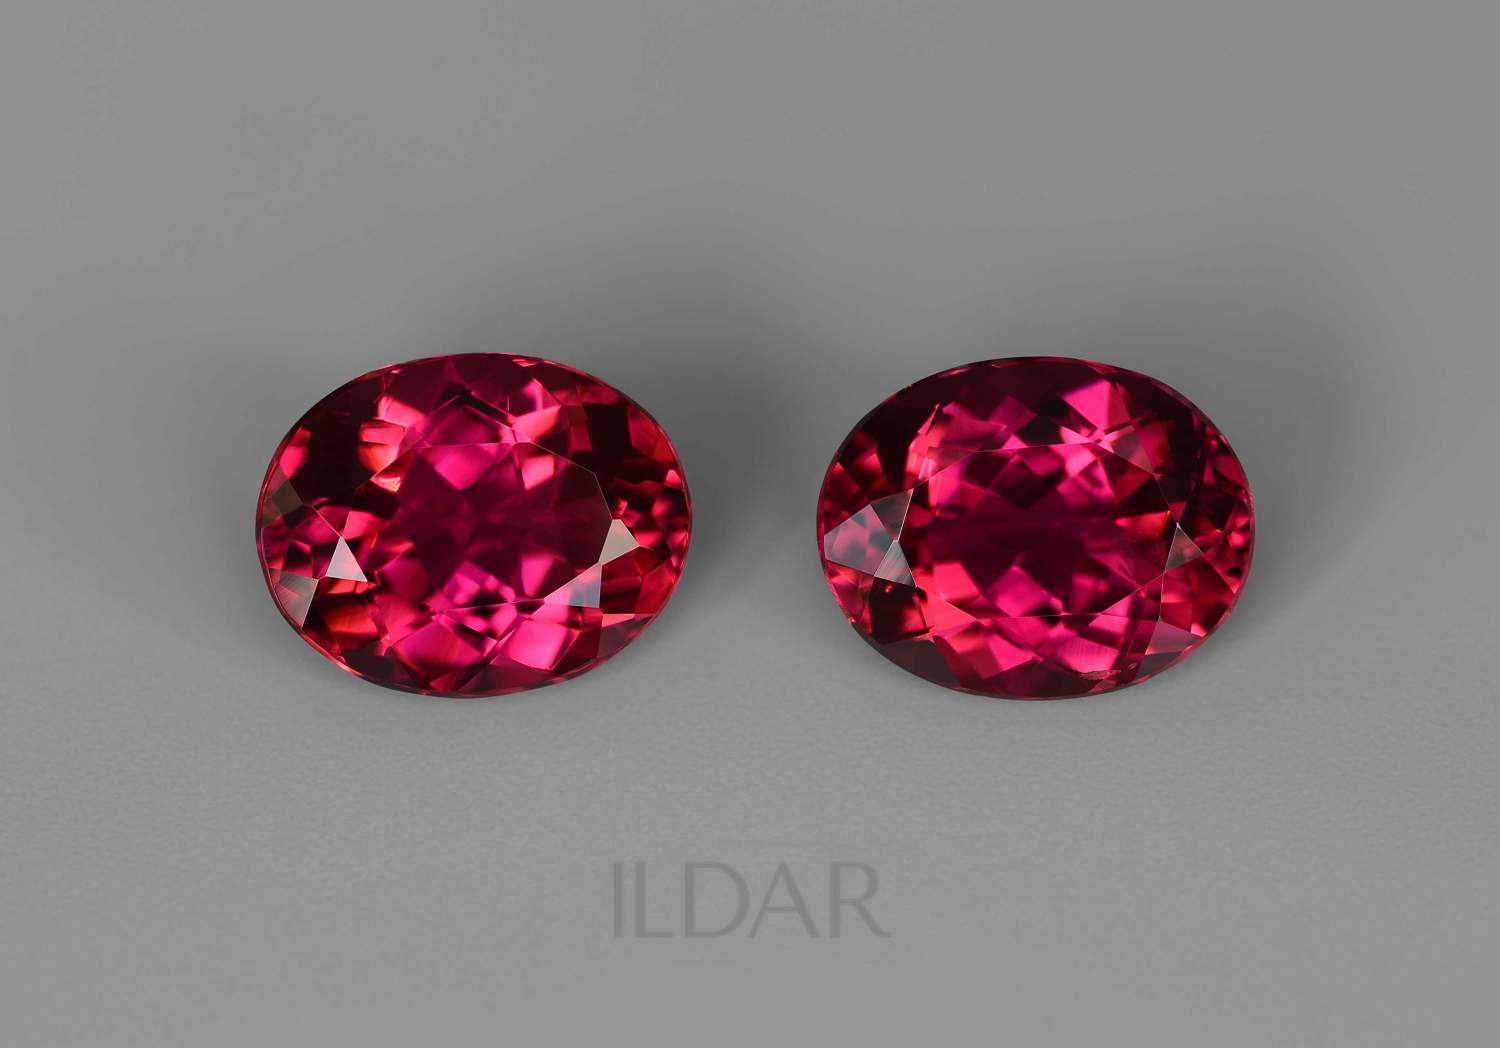 Matched pair of natural rubellites 4.69 ct order